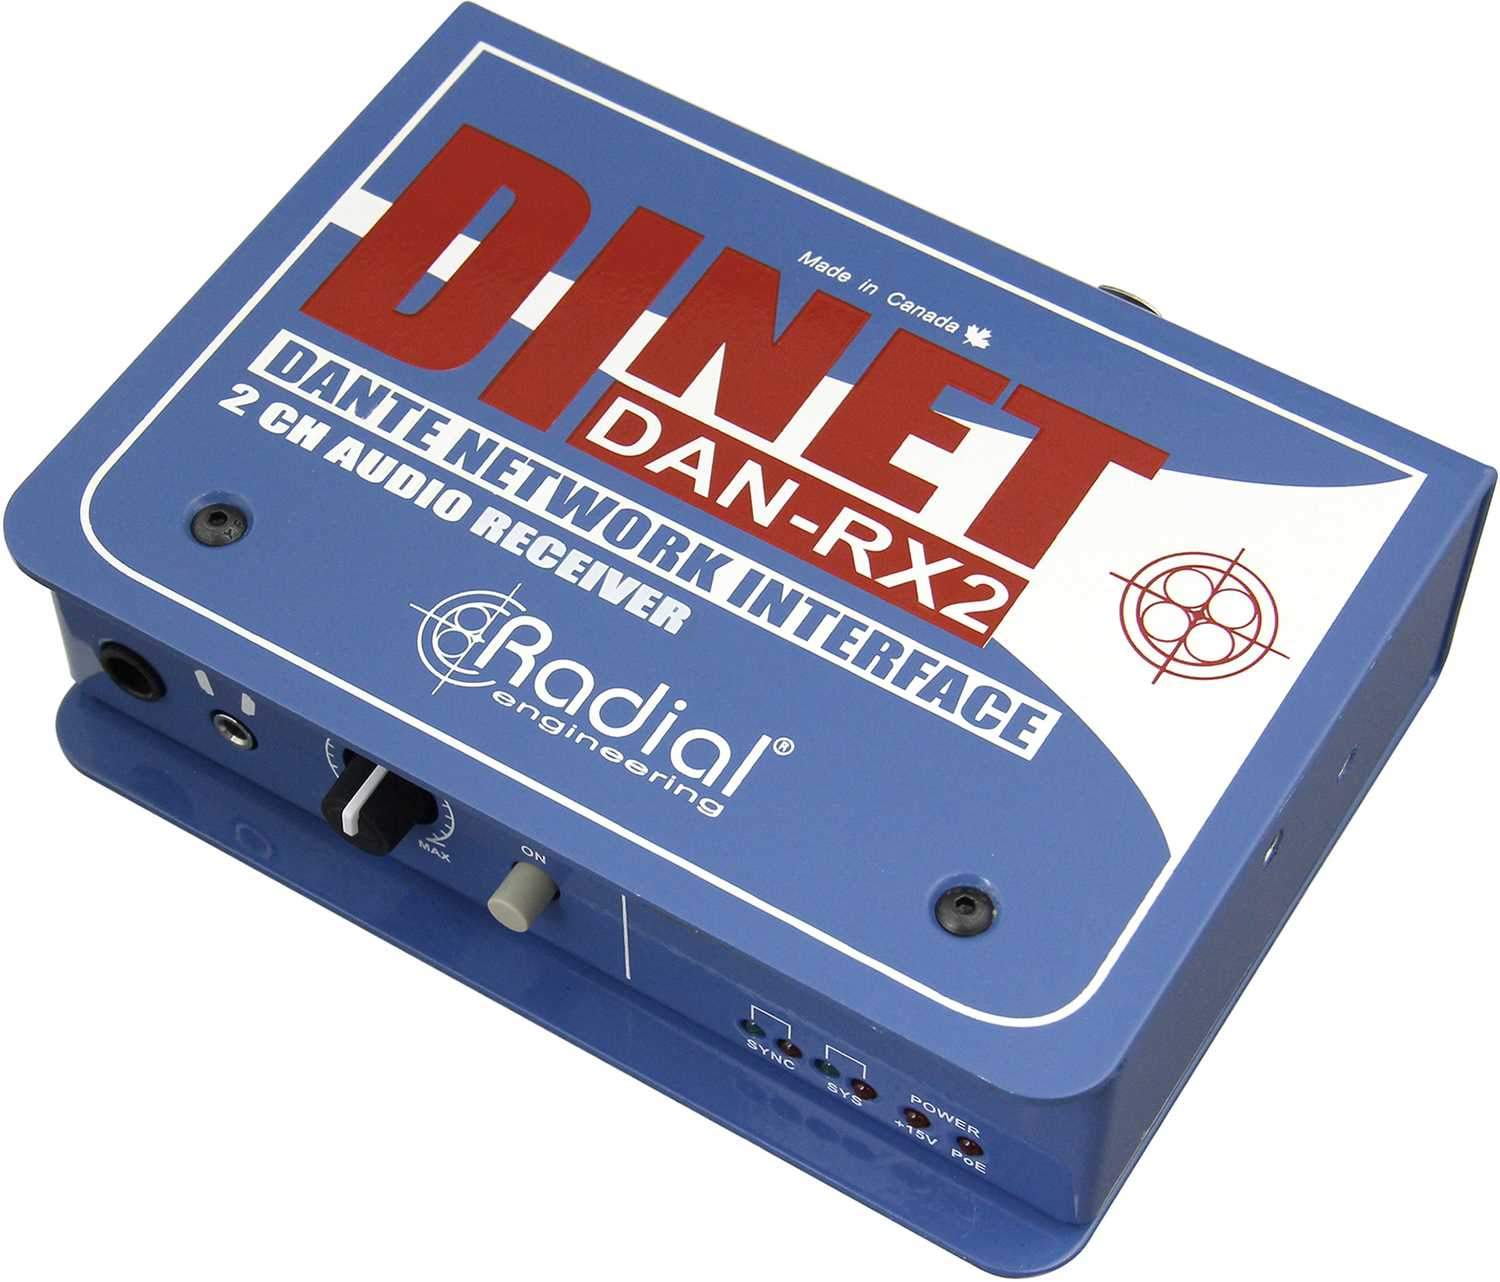 Radial DiNet DAN-RX2 Dante Network Receiver - ProSound and Stage Lighting